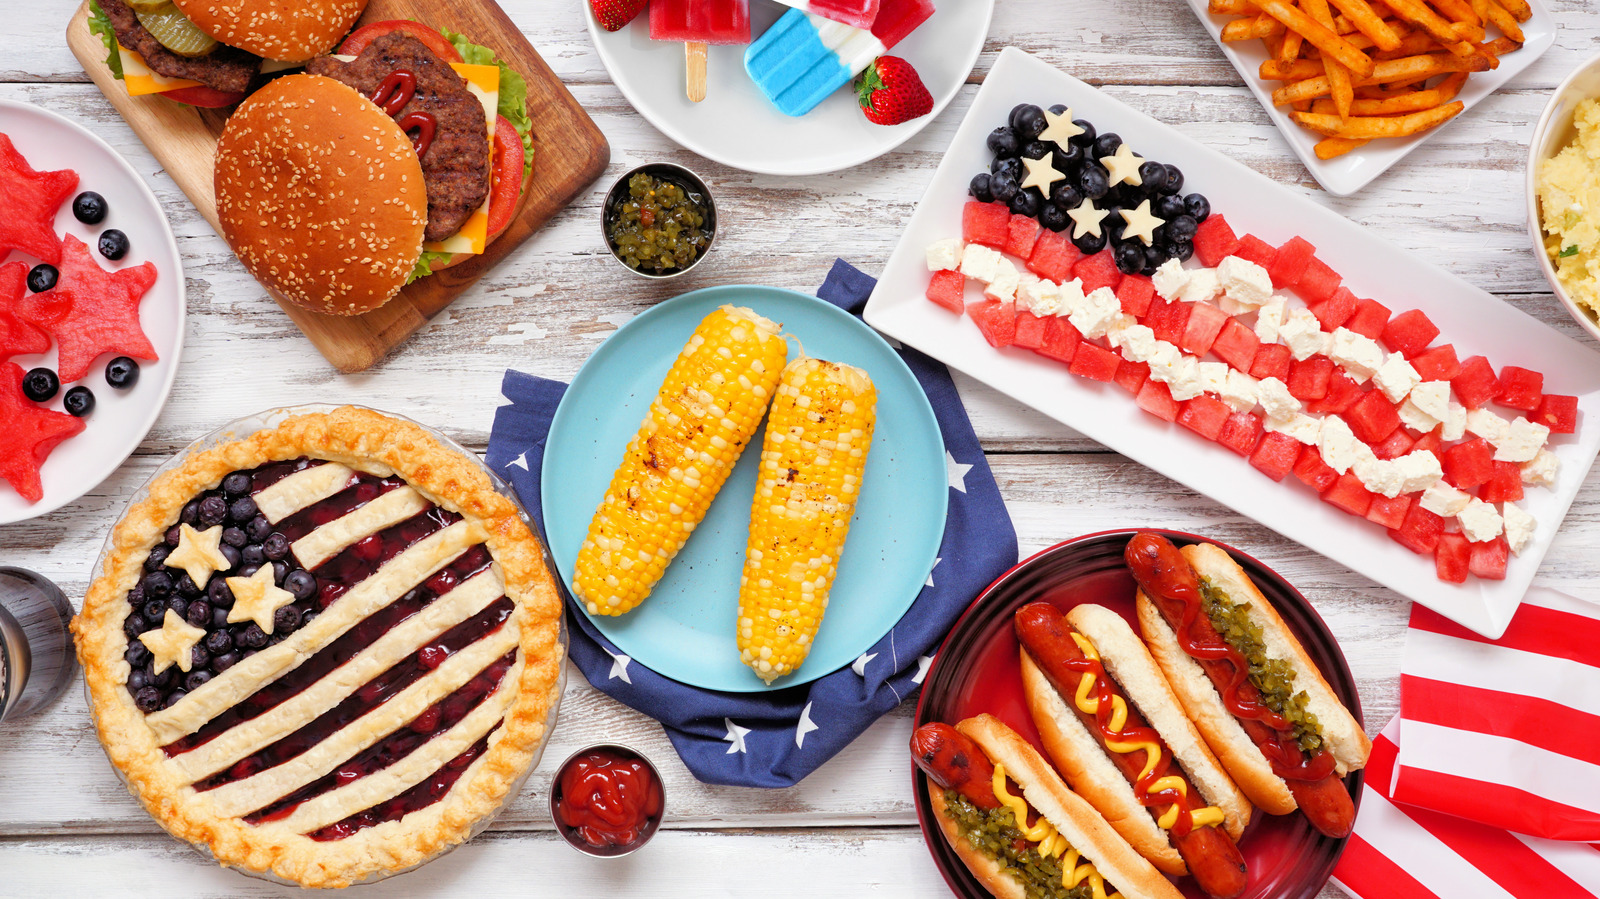 Expert Strategy for Choosing Side Dishes for the Fourth of July